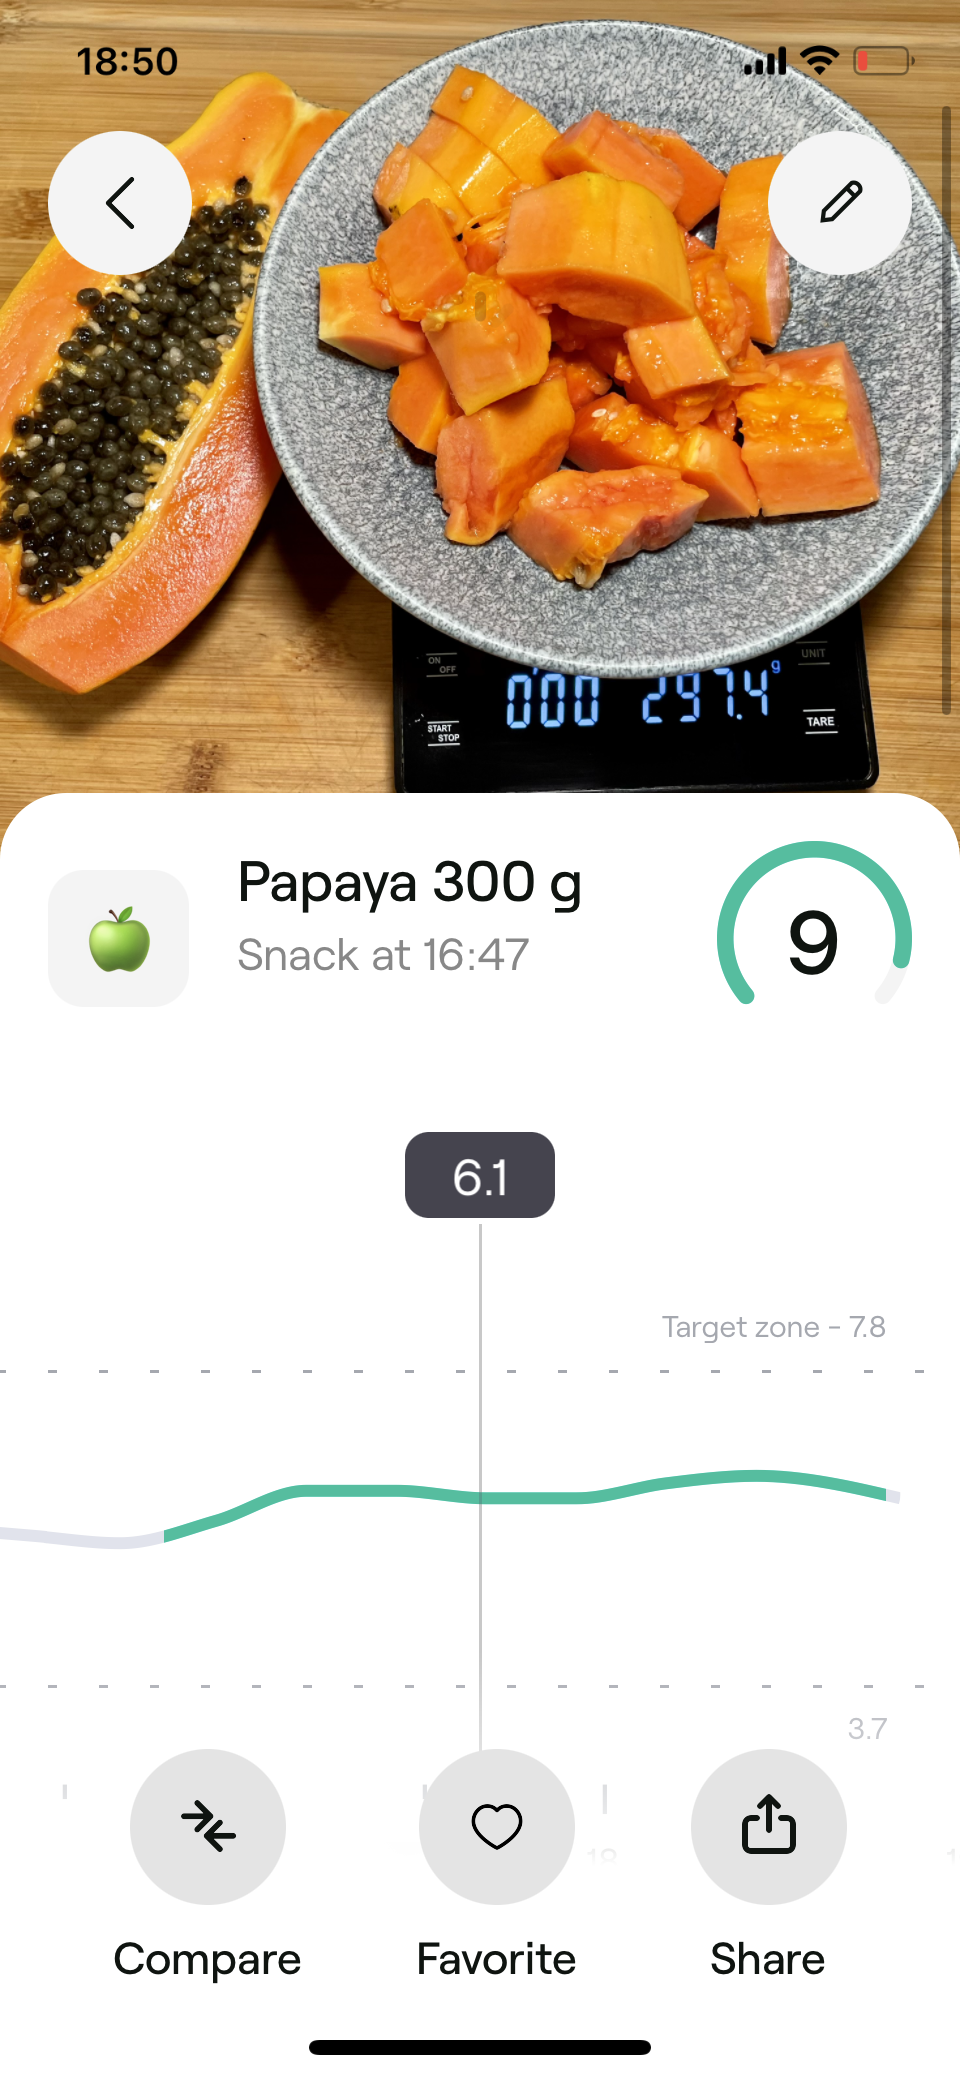 Papaya. Experiment by our expert